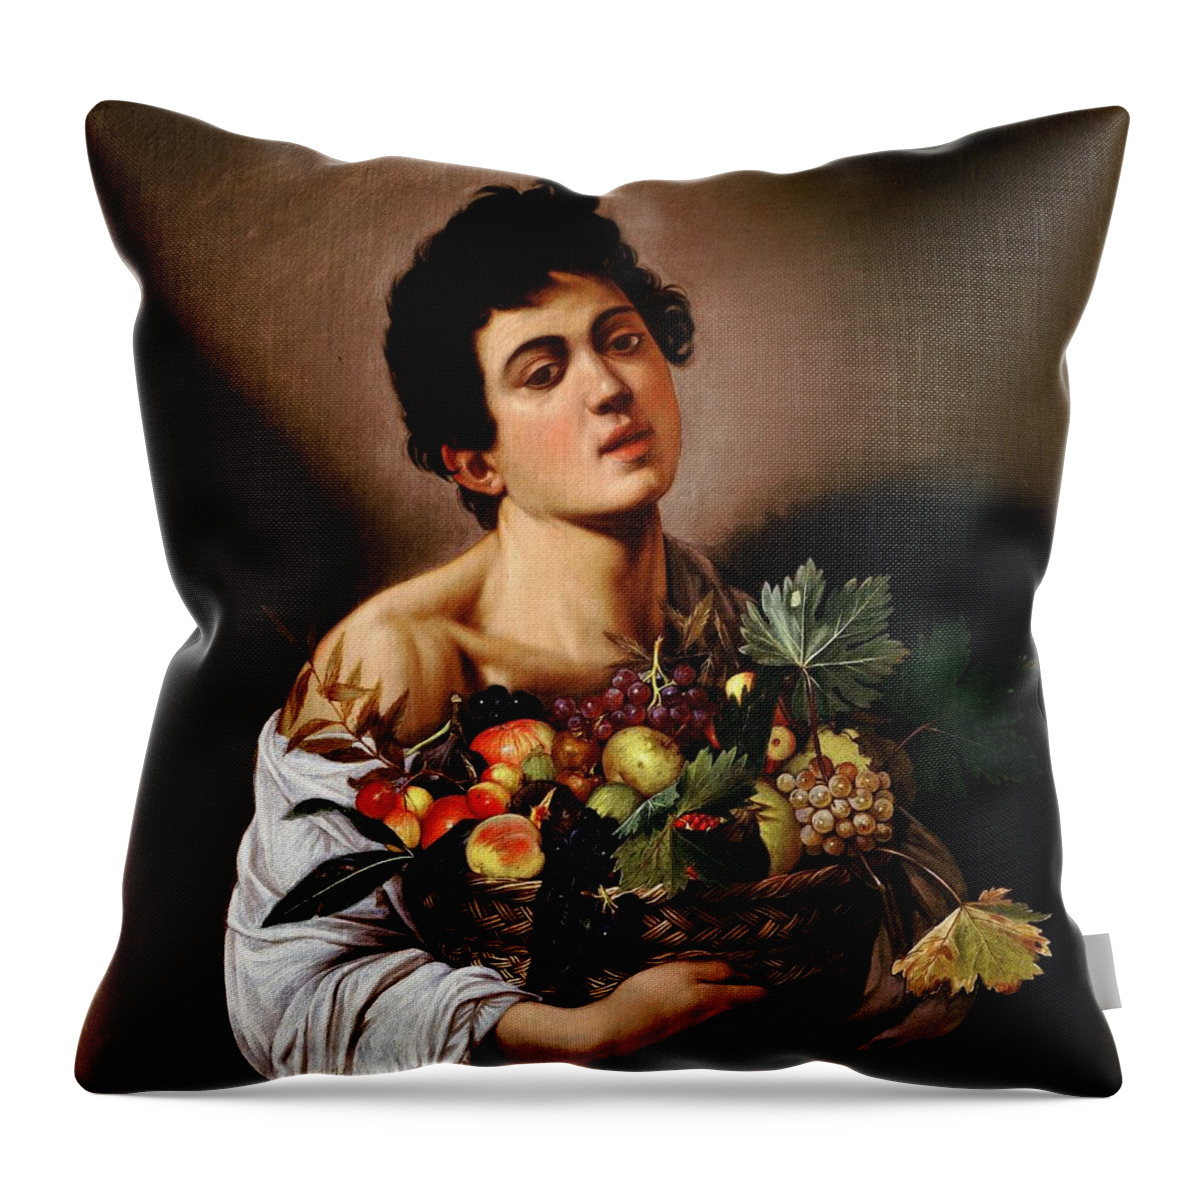 Youn Boy Throw Pillow featuring the painting Boy With Basket of Fruit #1 by Caravaggio